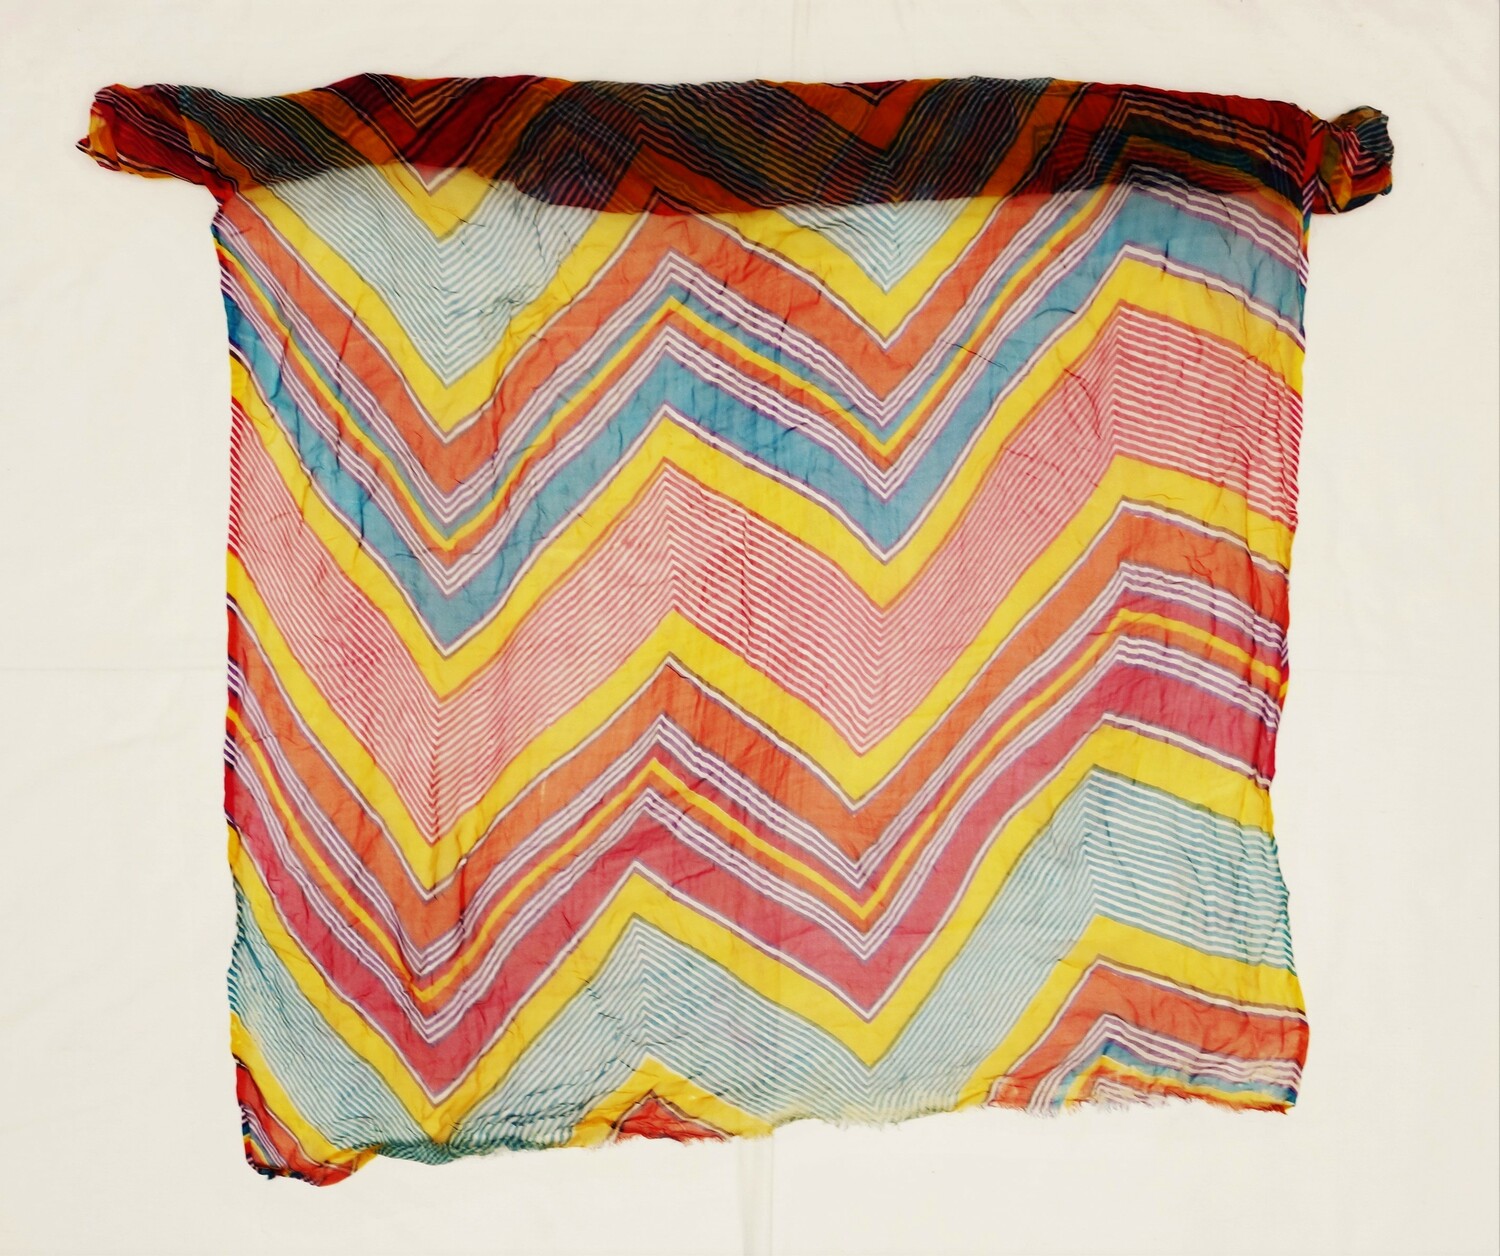 Long length of leheria cloth with a colourful design of diagonal stripes in various widths and bright colours. Udaipur, Rajasthan, India, 1980 (TRC 2022.2119).